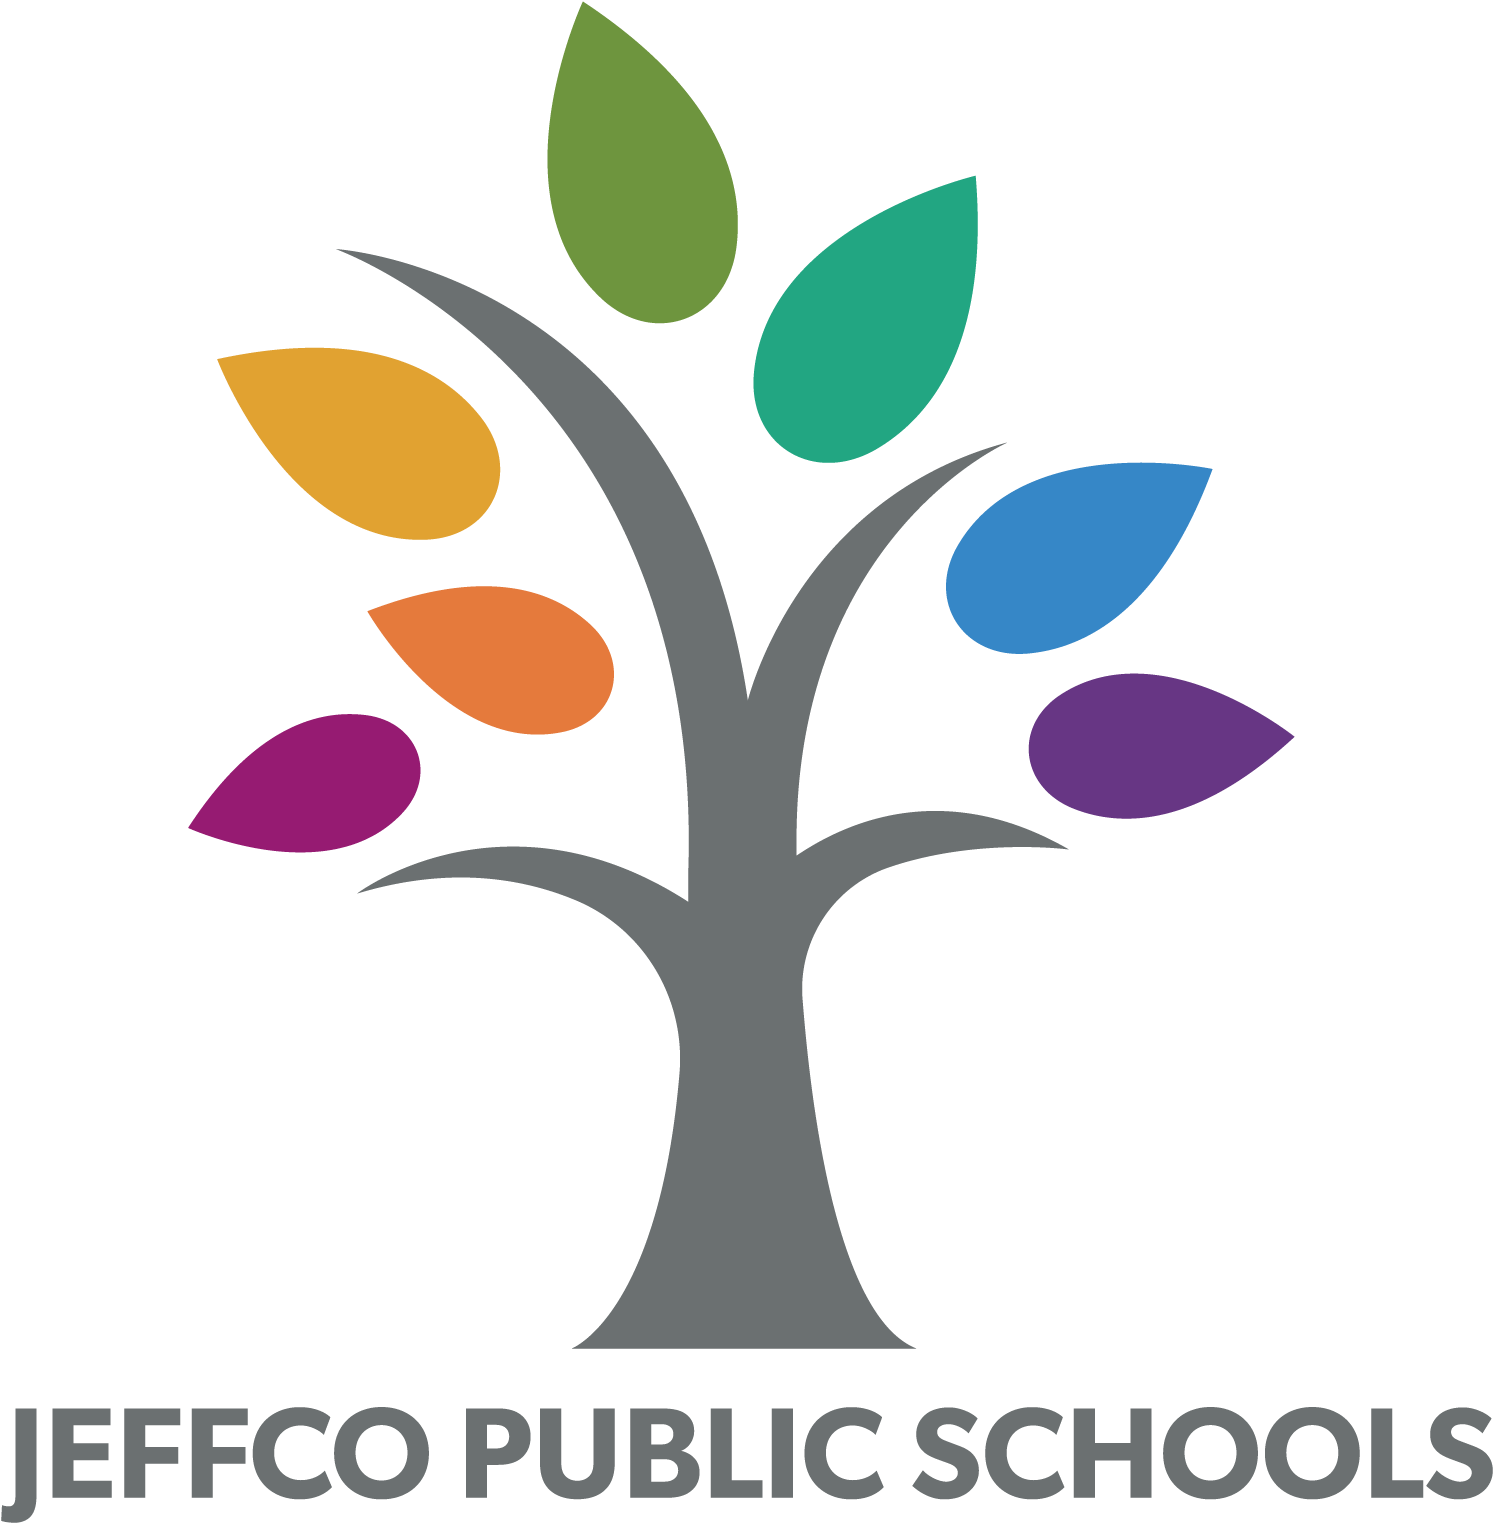 This Is The Image For The News Article Titled 2018-19 - Jeffco Public Schools (1566x1596)